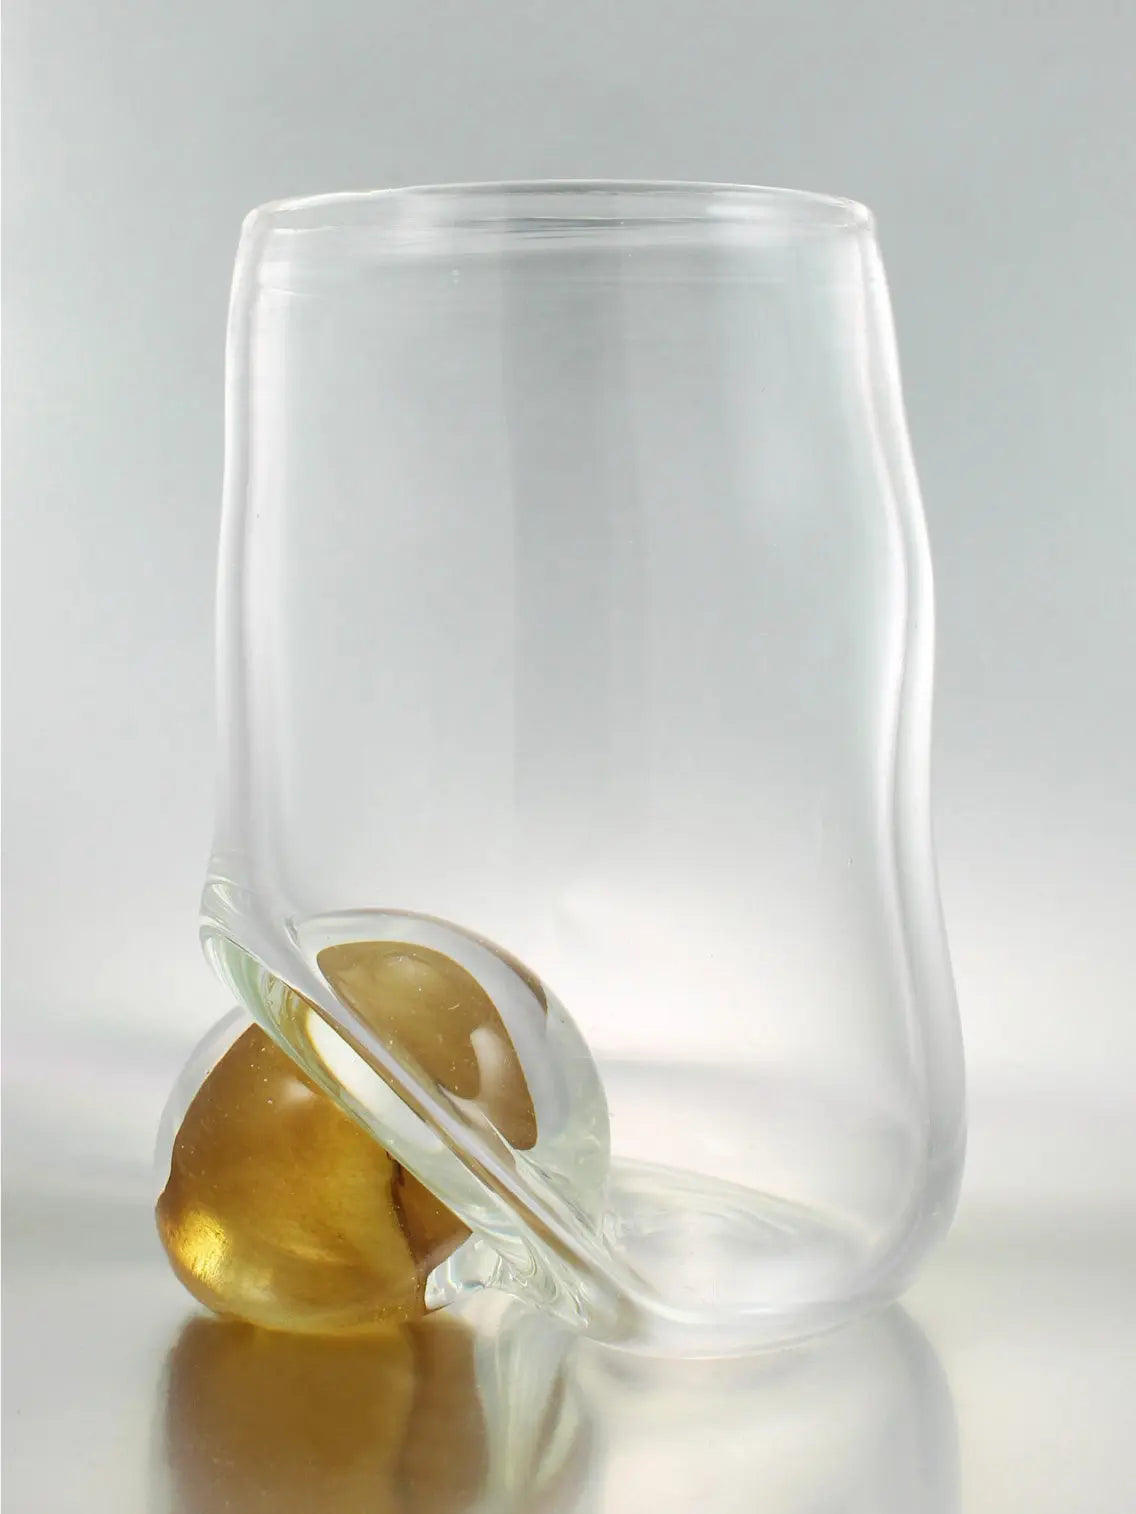 A Bola Vase from Nathalie Schreckenberg in Barcelona, featuring a clear, wavy cylindrical form with a rounded base. Encased within it is a spherical object with amber coloration, creating a unique blend of transparency and color. The setting is a simple, light background.